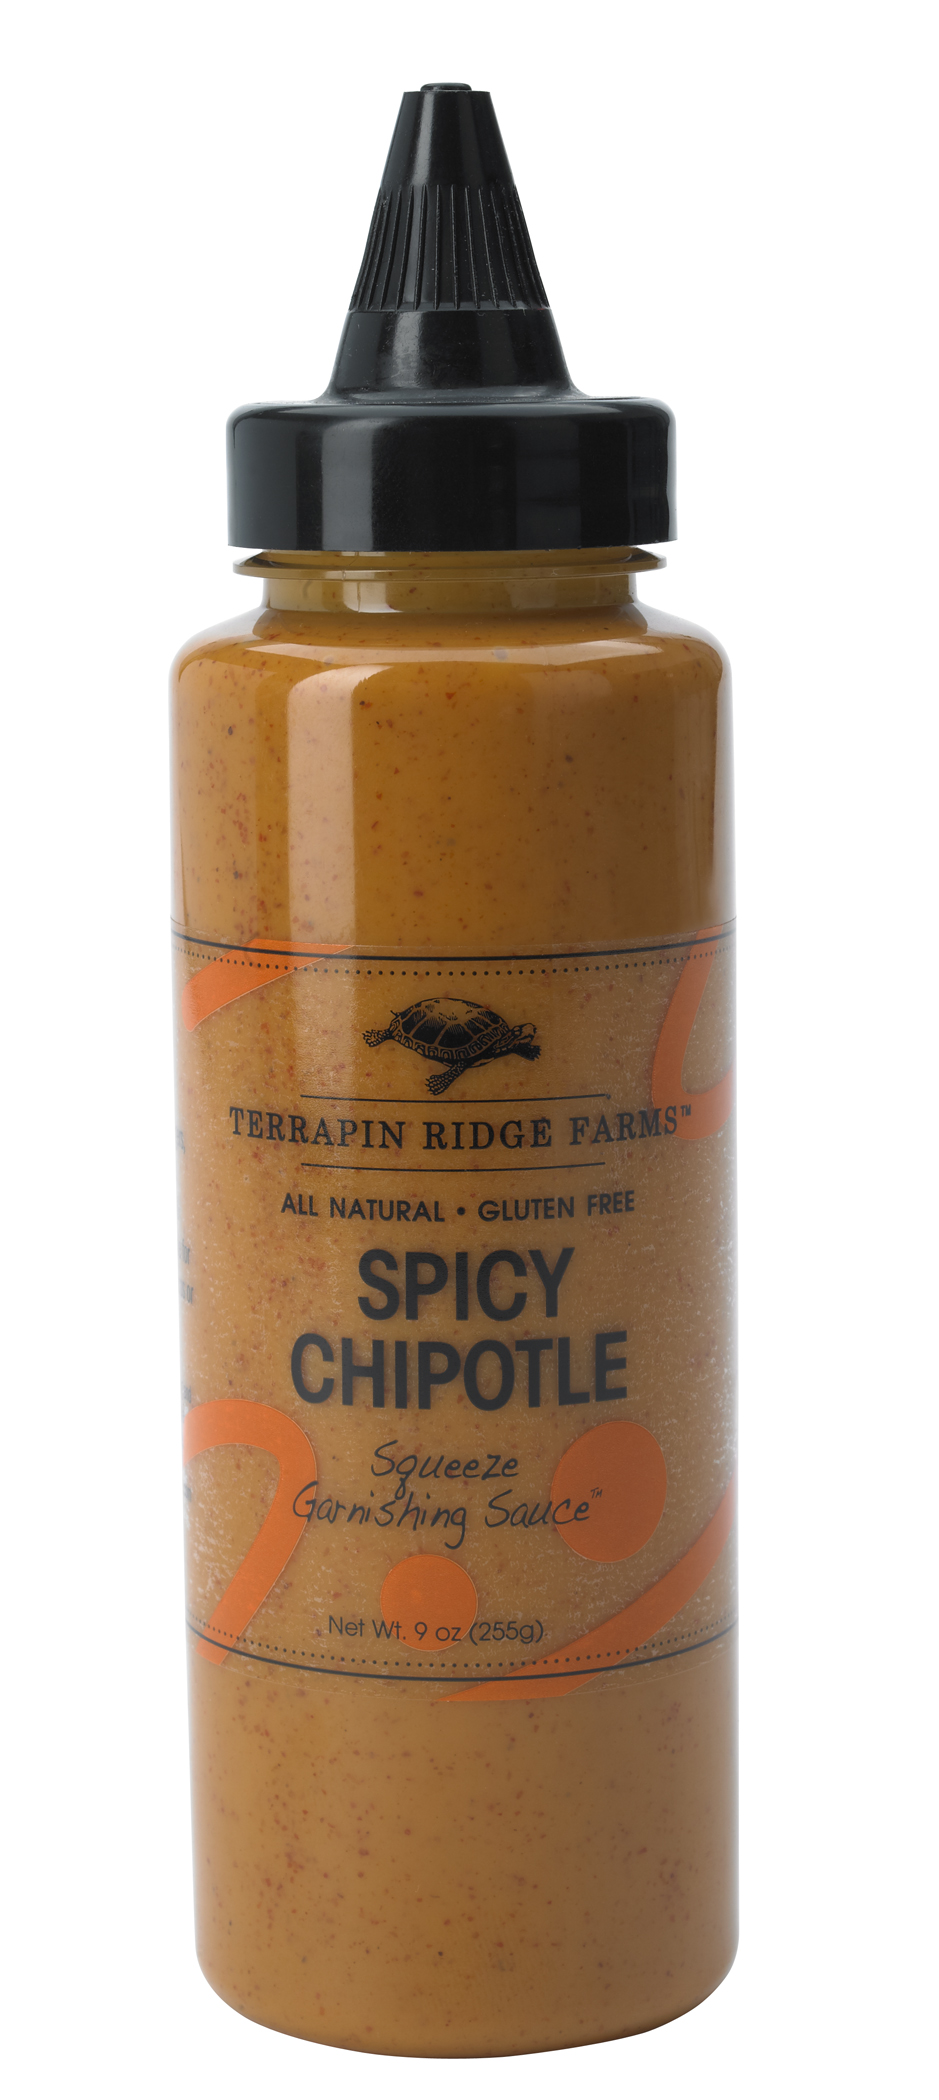 SPICY CHIPOTLE SAUCE